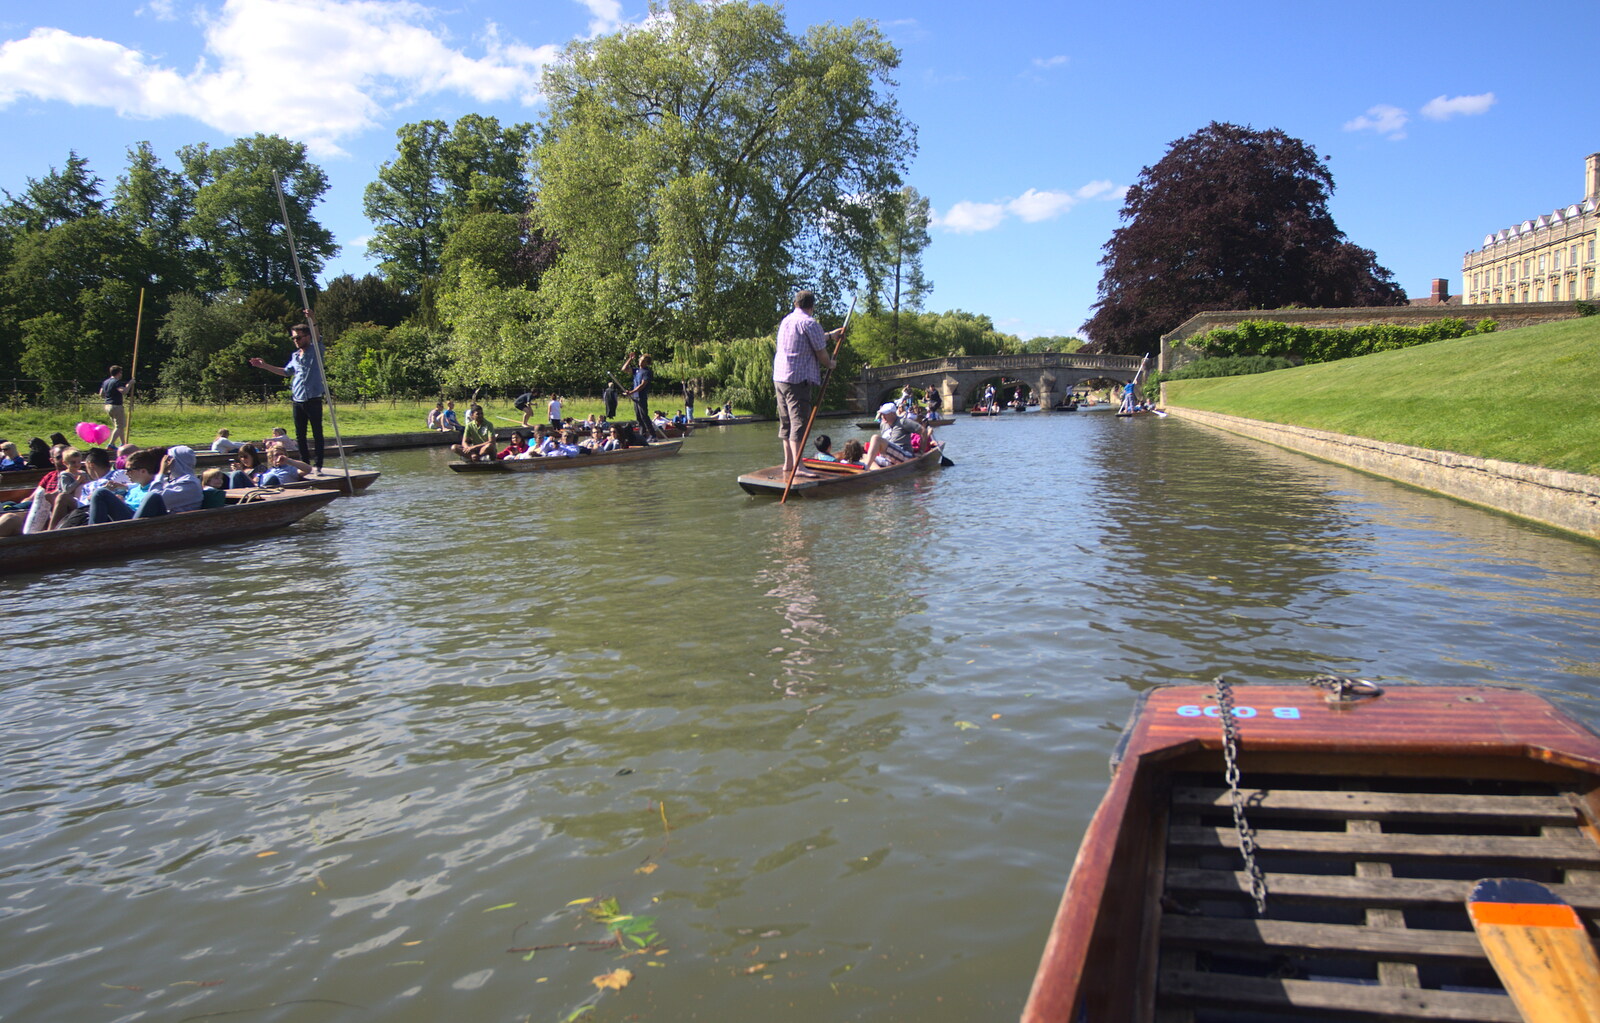 MAssed punts on the Cam from Punting With Grandad, Cambridge, Cambridgeshire - 6th June 2015